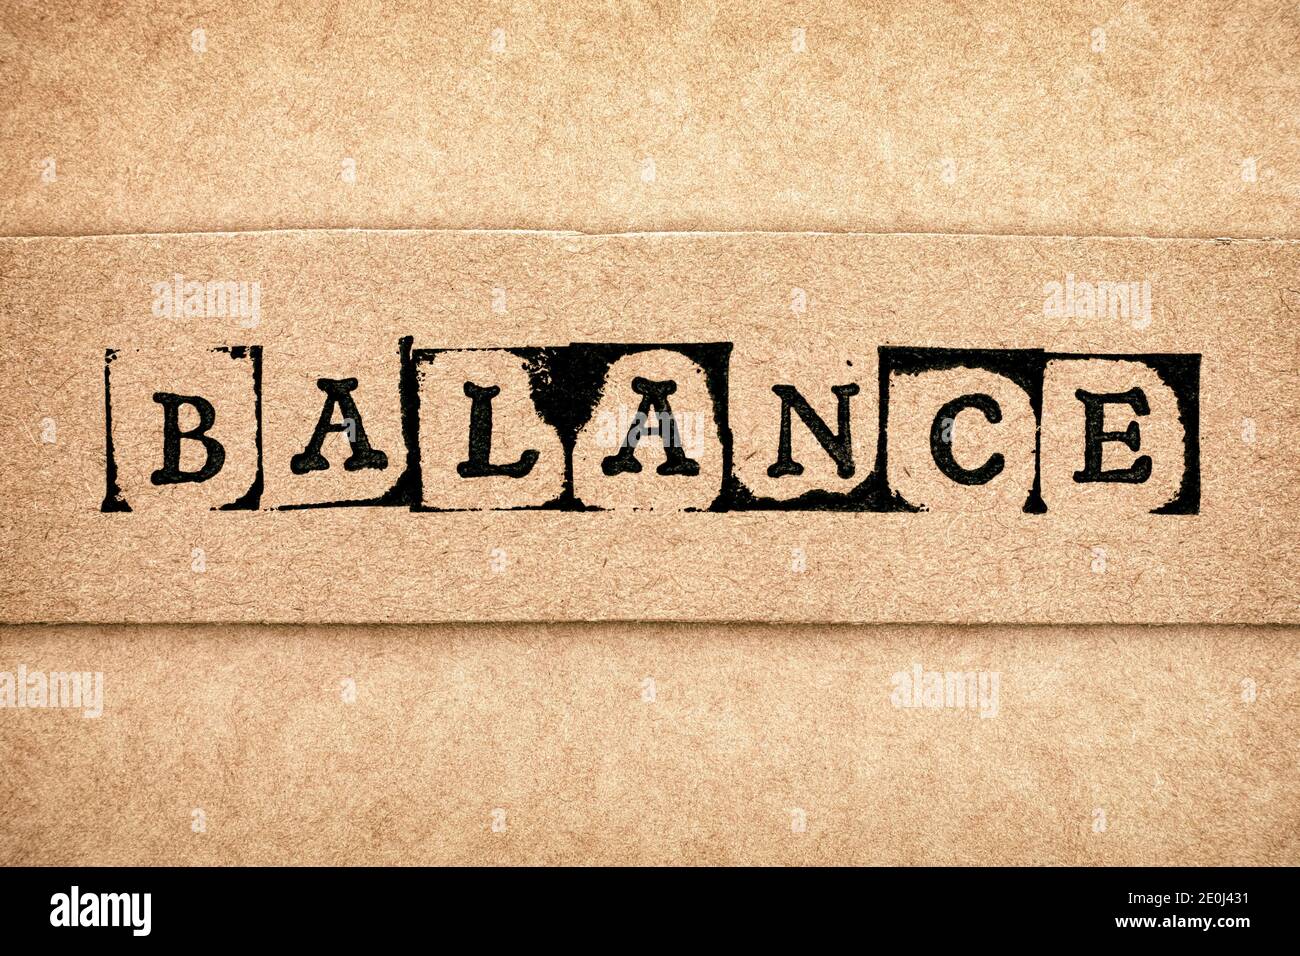 Letter Balance Stock Photo, Picture and Royalty Free Image. Image 12290997.